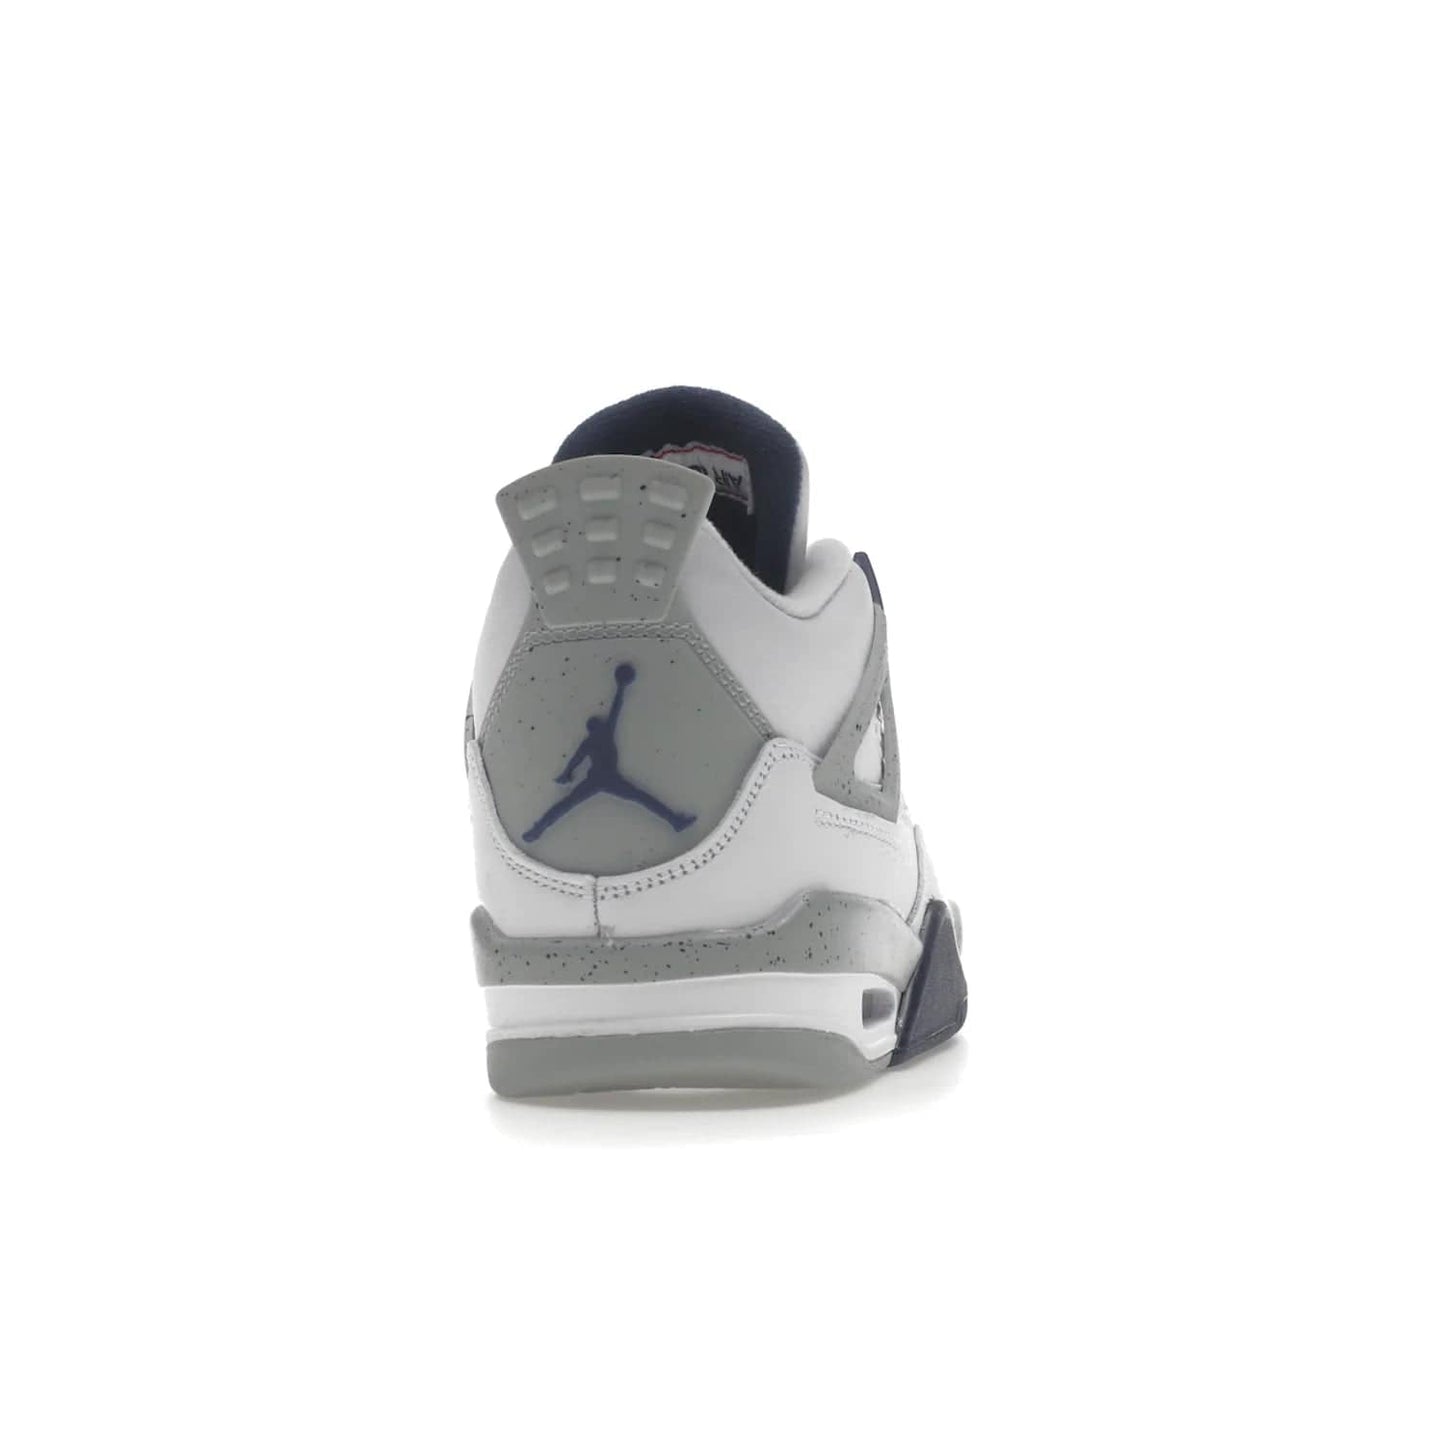 Jordan 4 Retro Midnight Navy (GS) - Image 29 - Only at www.BallersClubKickz.com - Shop the Air Jordan 4 Retro Midnight Navy GS. The white leather upper features black support wings & heel tab, navy eyelets & woven tongue tag with Jumpman logos. The midsole features two-tone polyurethane insole & AIR units in the heel & forefoot. Get the white/midnight navy/light smoke grey/fire colorway & show off your style.